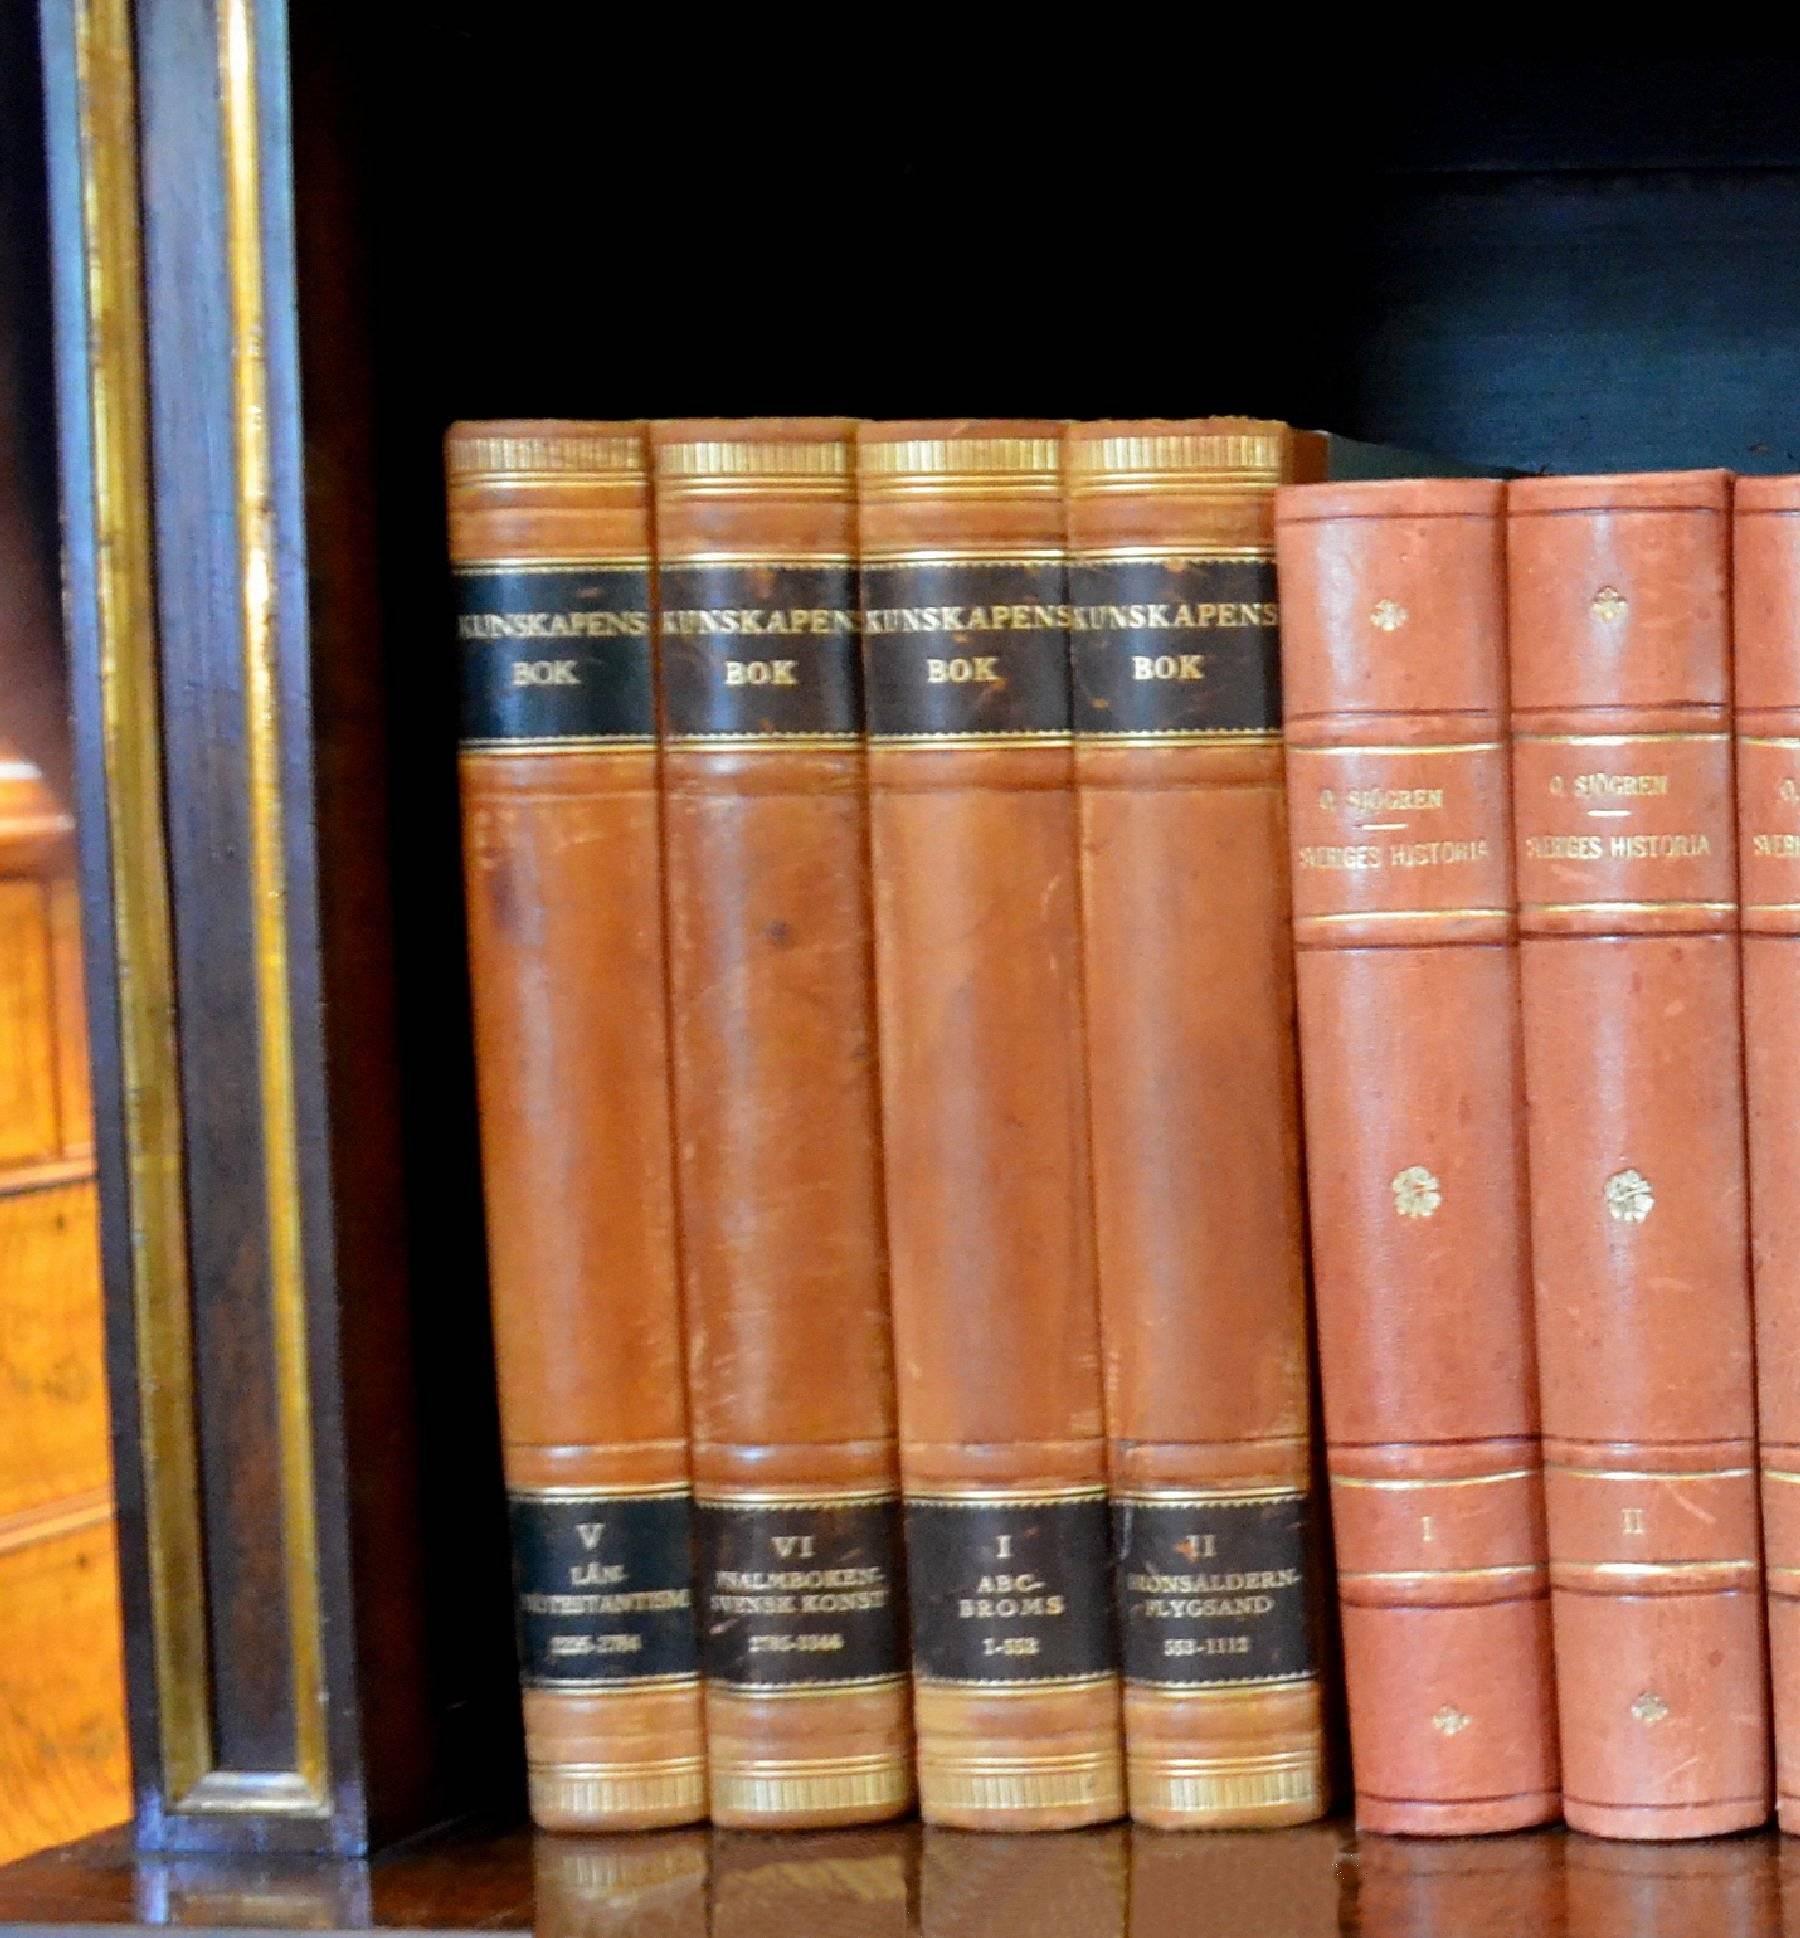 This metre of leather-bound books contains 22 books, in warm colours of dark brown, tan, pale red pink, and bright gold with gold leaf embossing. These books are all in very good condition and would beautifully enhance any bookcase or library.